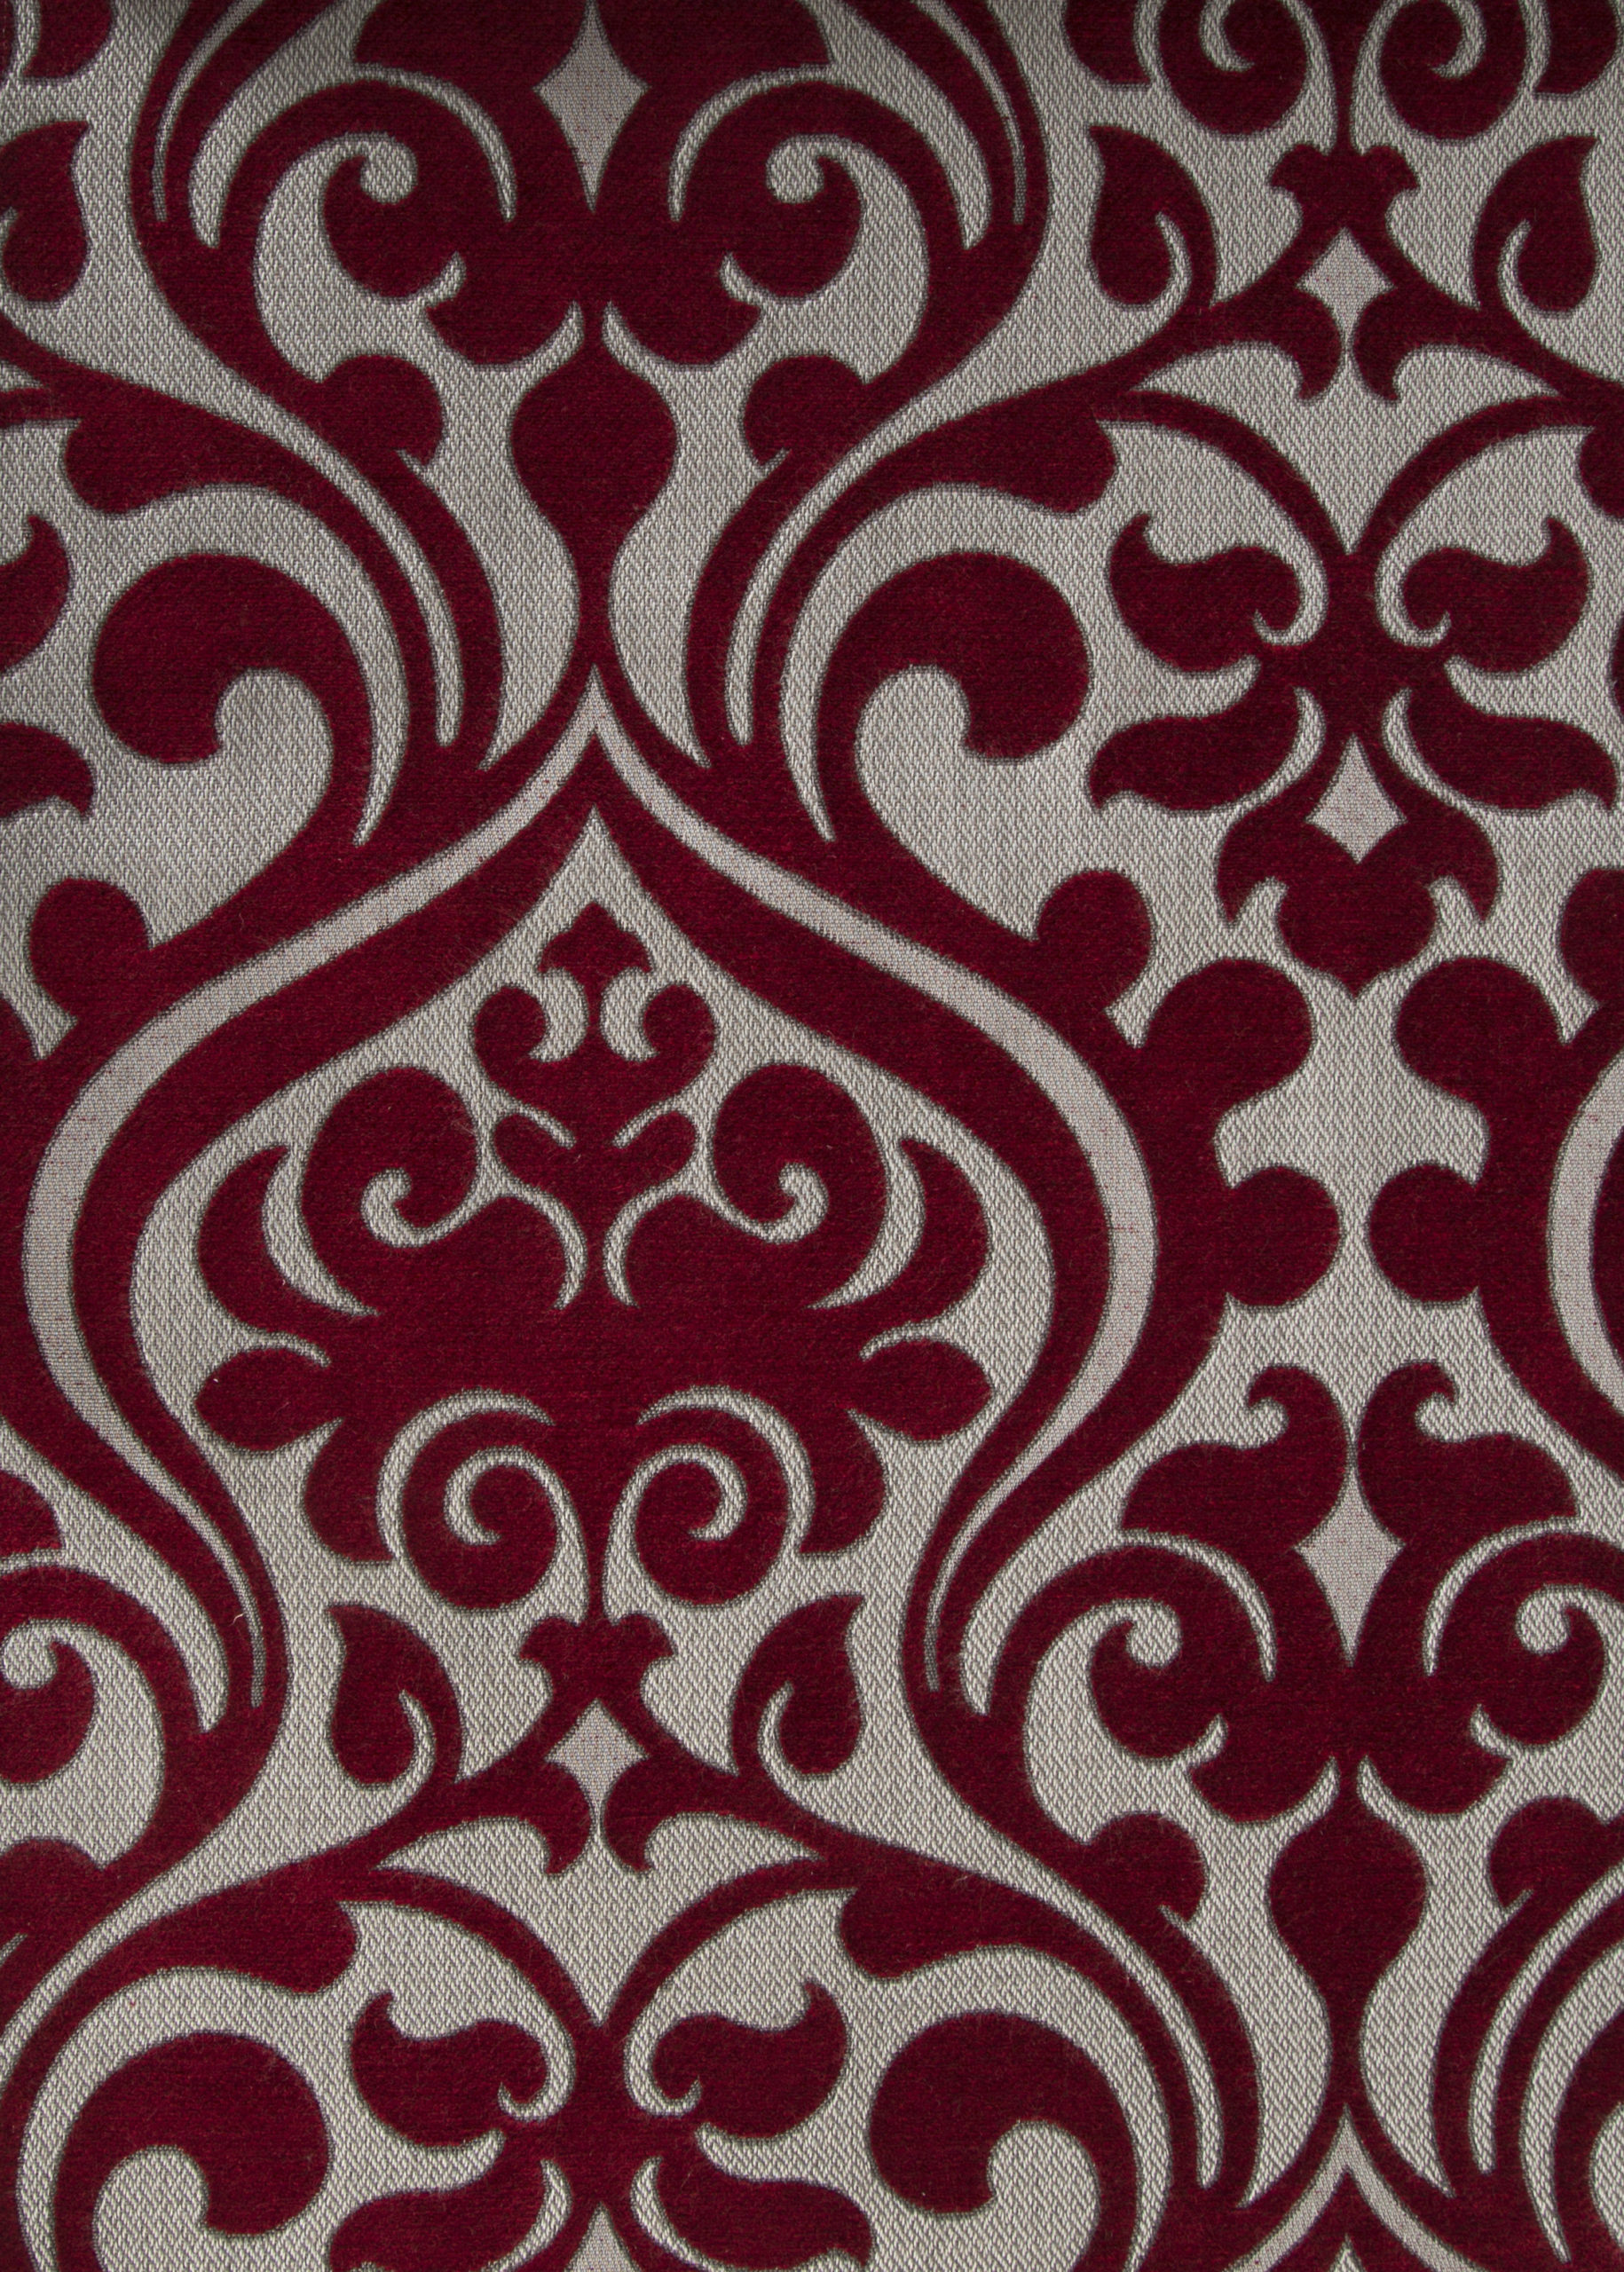 New Fabrics 2020 | Summit Seating For Church Pulpits, Pews, Clergy Chairs